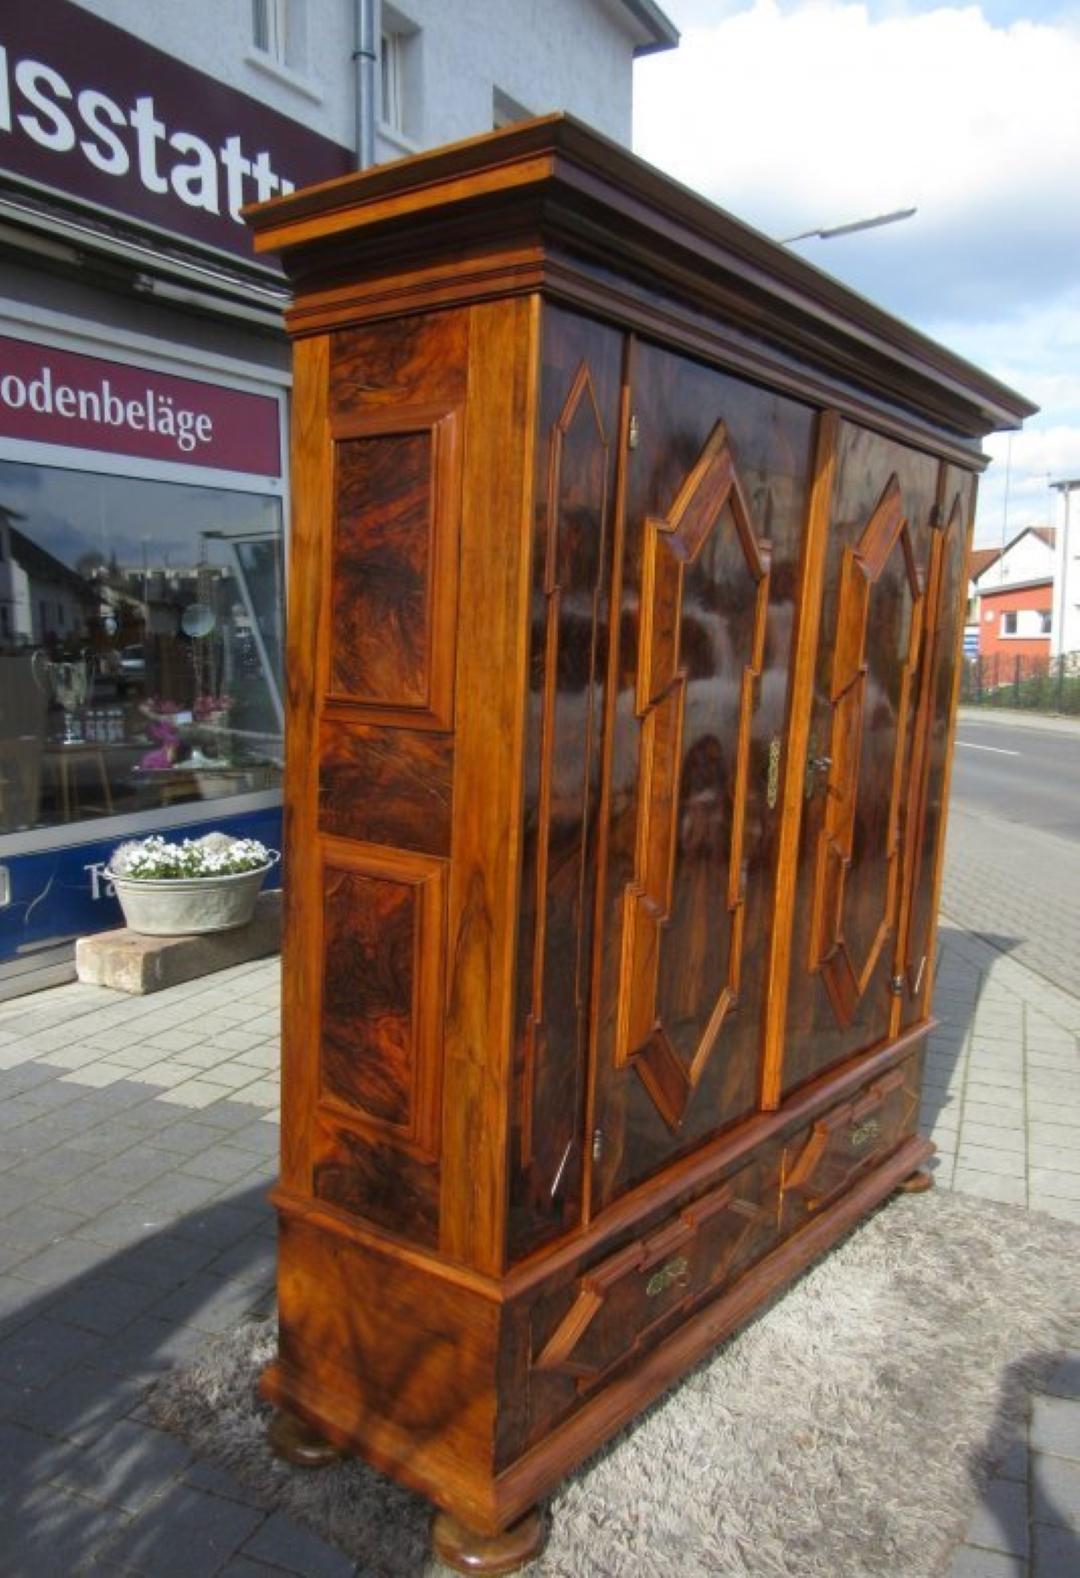 Amazing one of a kind baroque armoire cabinet with a stunning and luxurious dark walnut veneer. This amazing piece of antique furniture convinces with its wonderful wooden color and graining. Features geometrically carved patterns on the doors and